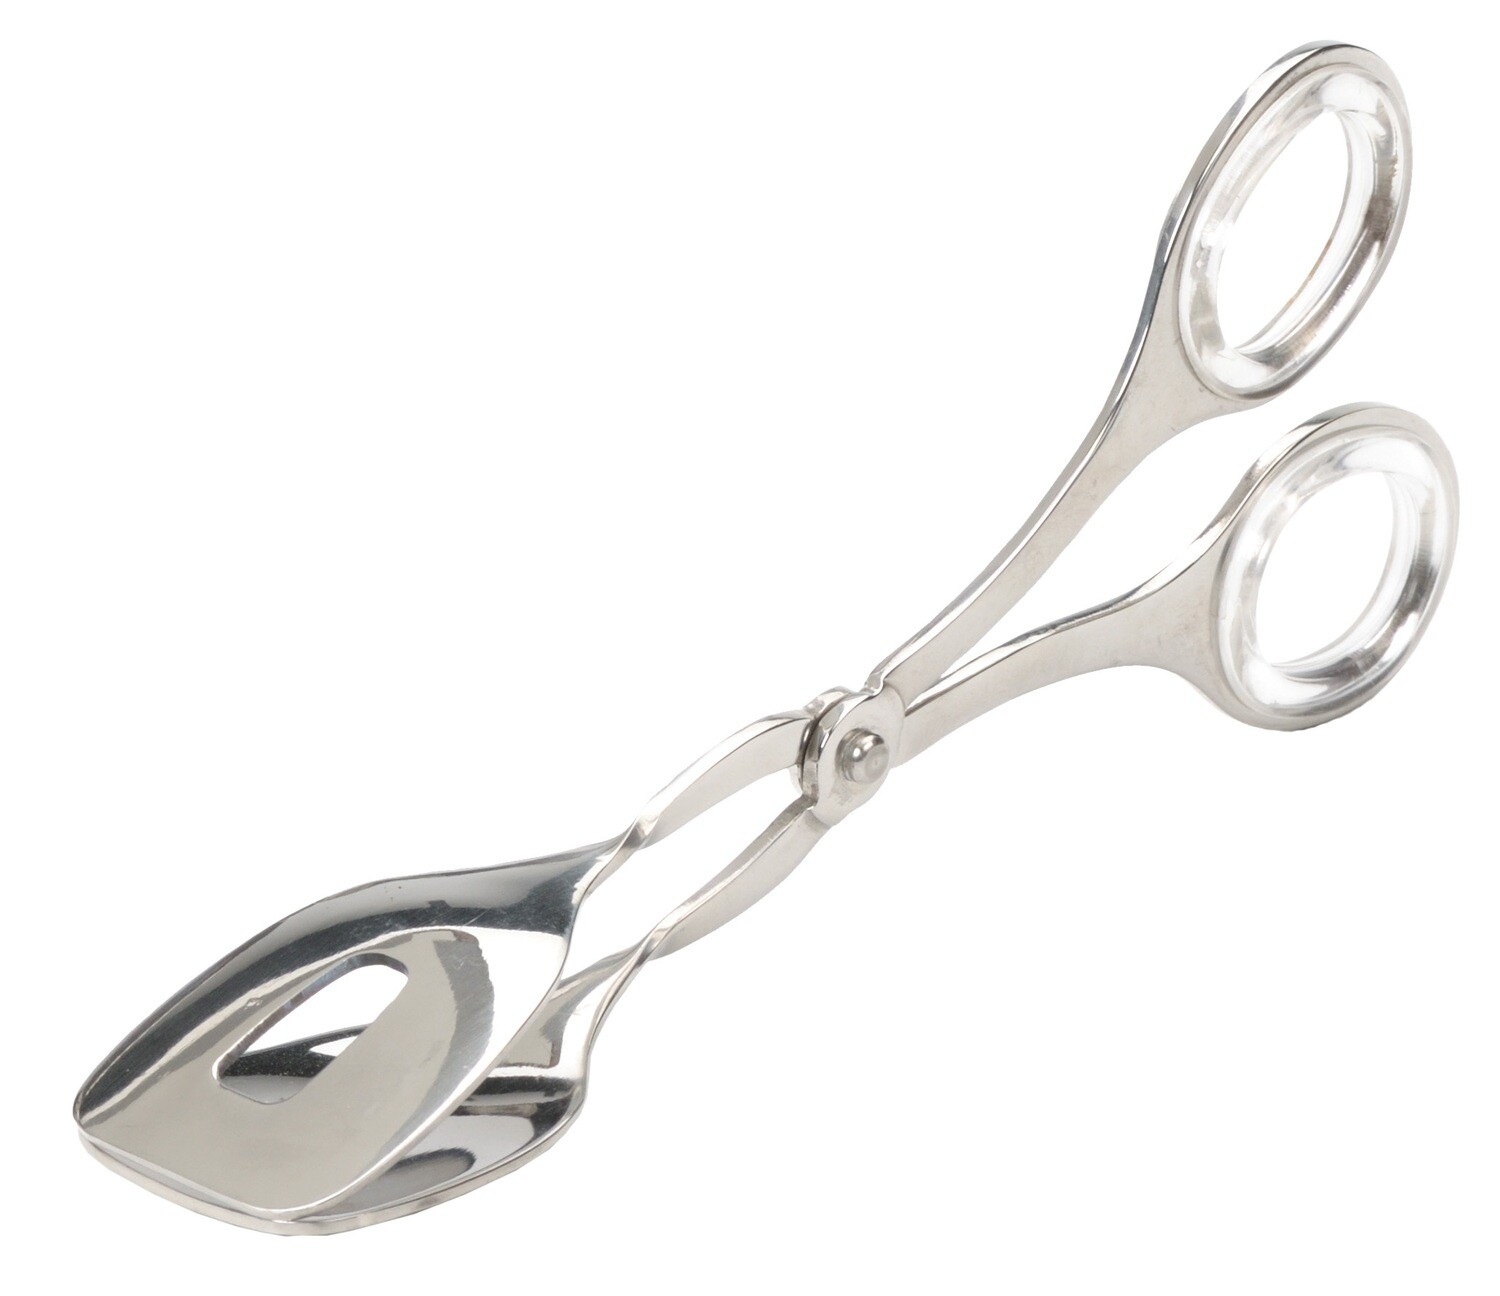 Small Serving Tongs #SKIPR